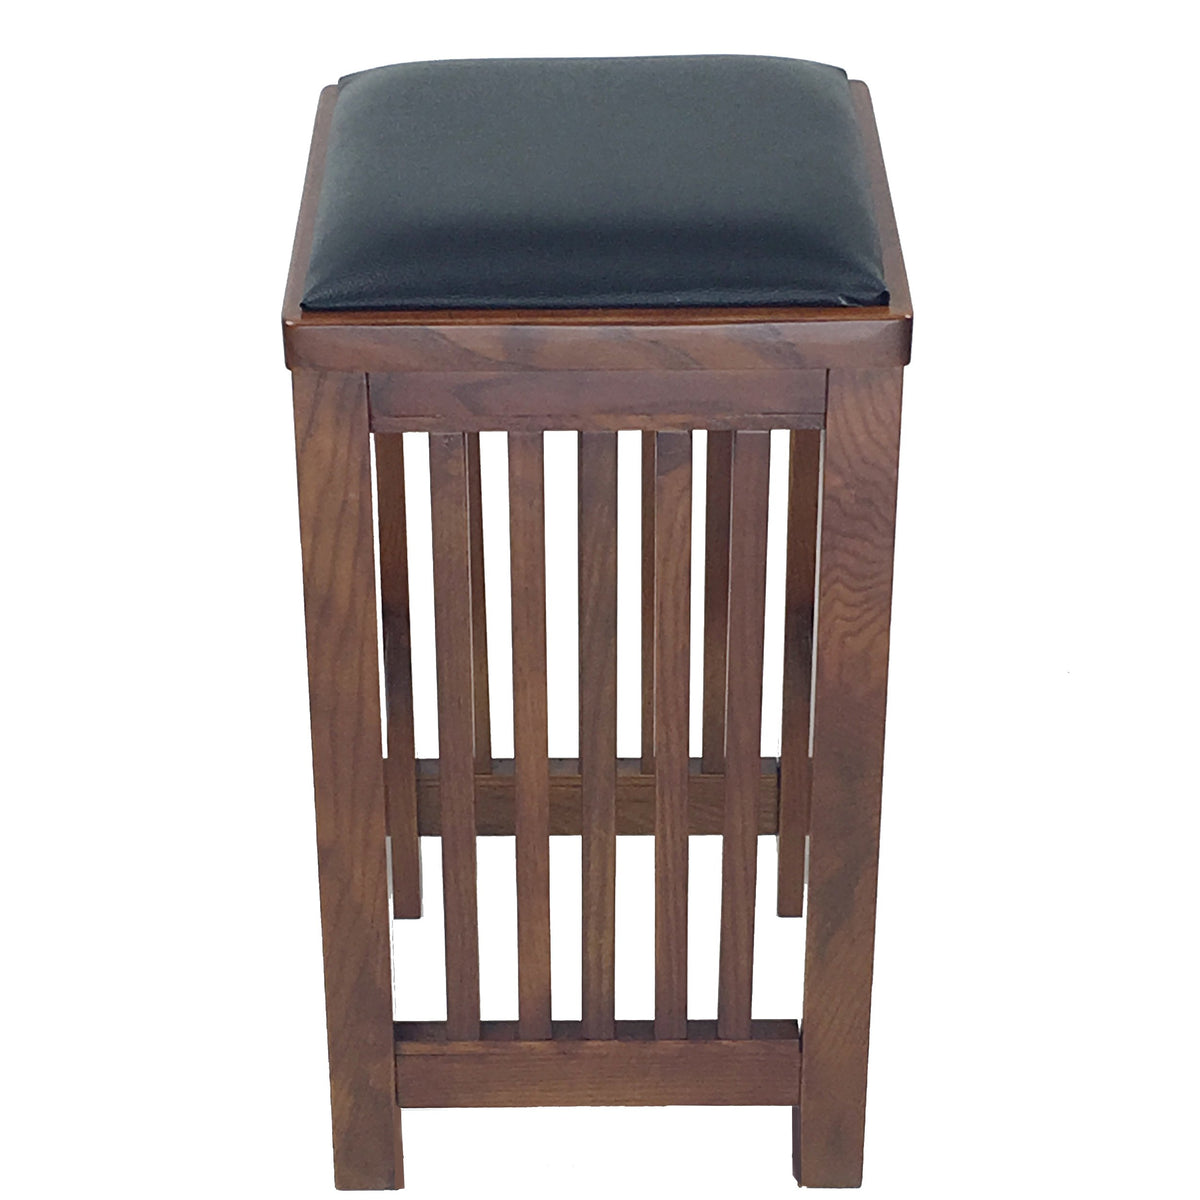 24 Inch Faux Leather Upholstered Wooden Backless Barstool, Oak Brown - BM210426